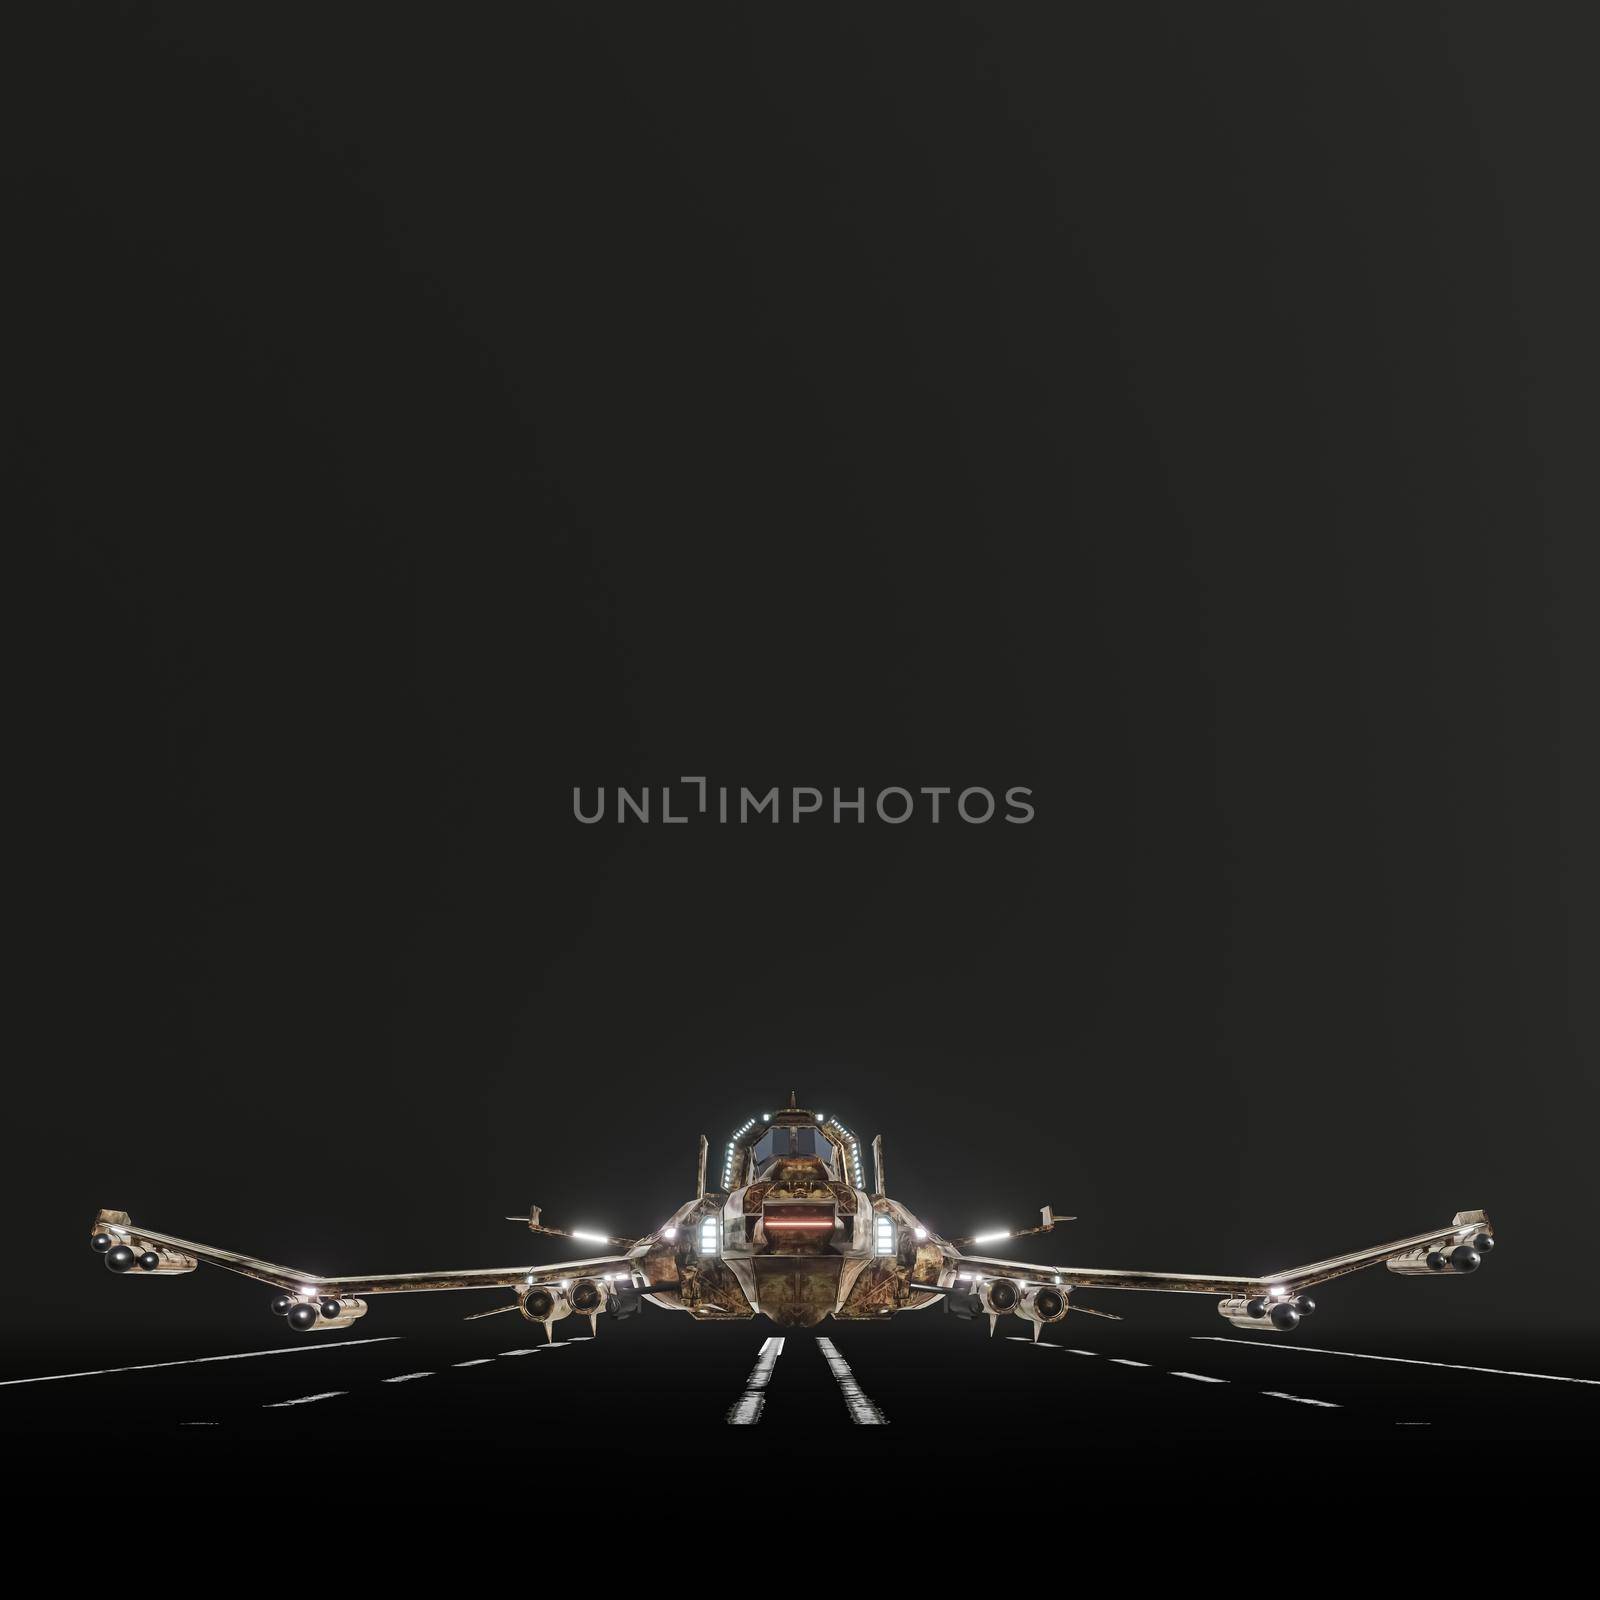 modern space fighter isolated on black background 3d illustration